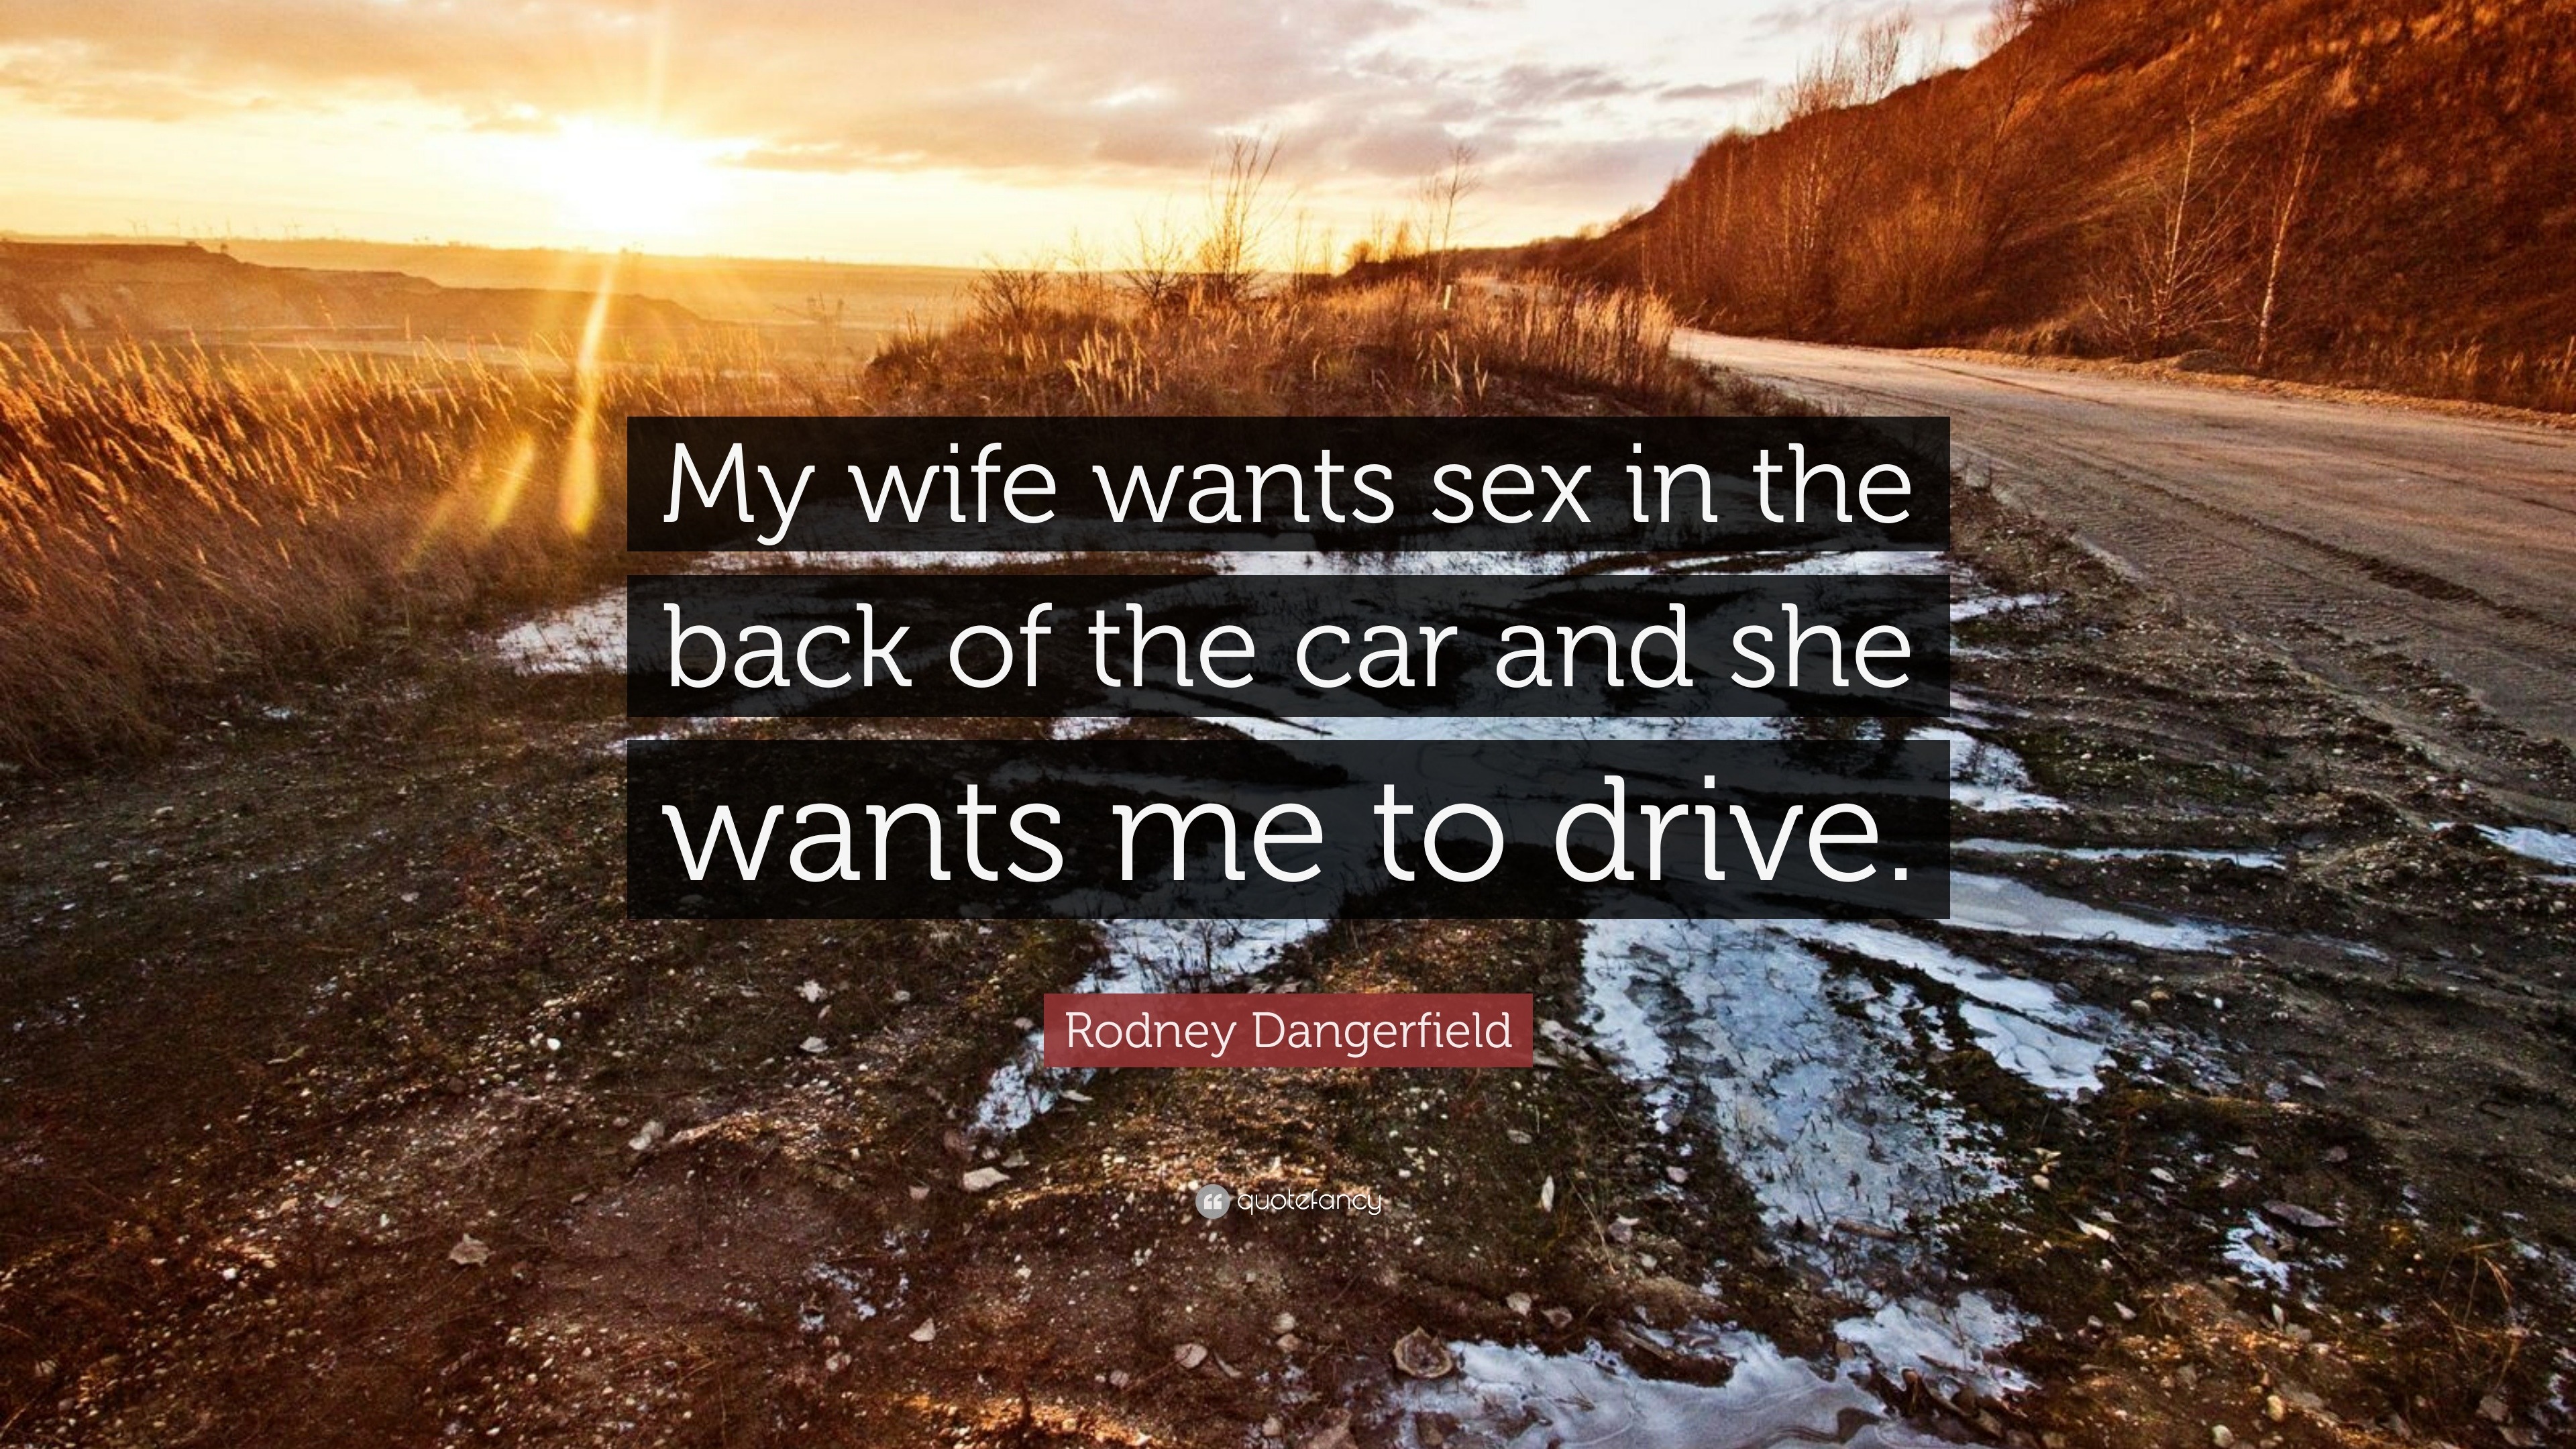 Rodney Dangerfield Quote “My wife wants sex in the back of the car and she wants pic